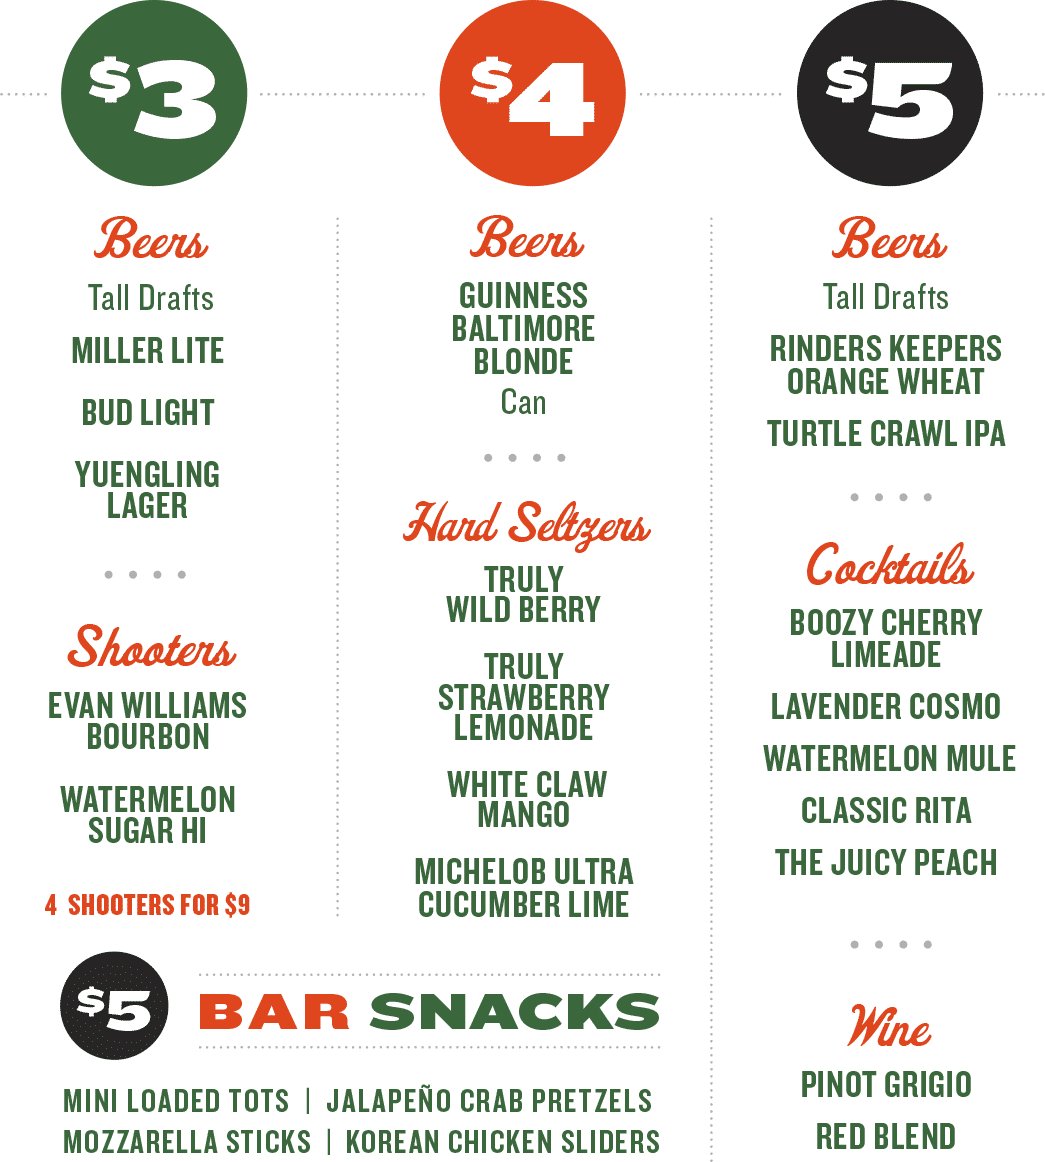 $3 Beers and Shooters, $4 Beers and Seltzers, $5 Beers, Wine & Cocktails, $5 Bar Snacks